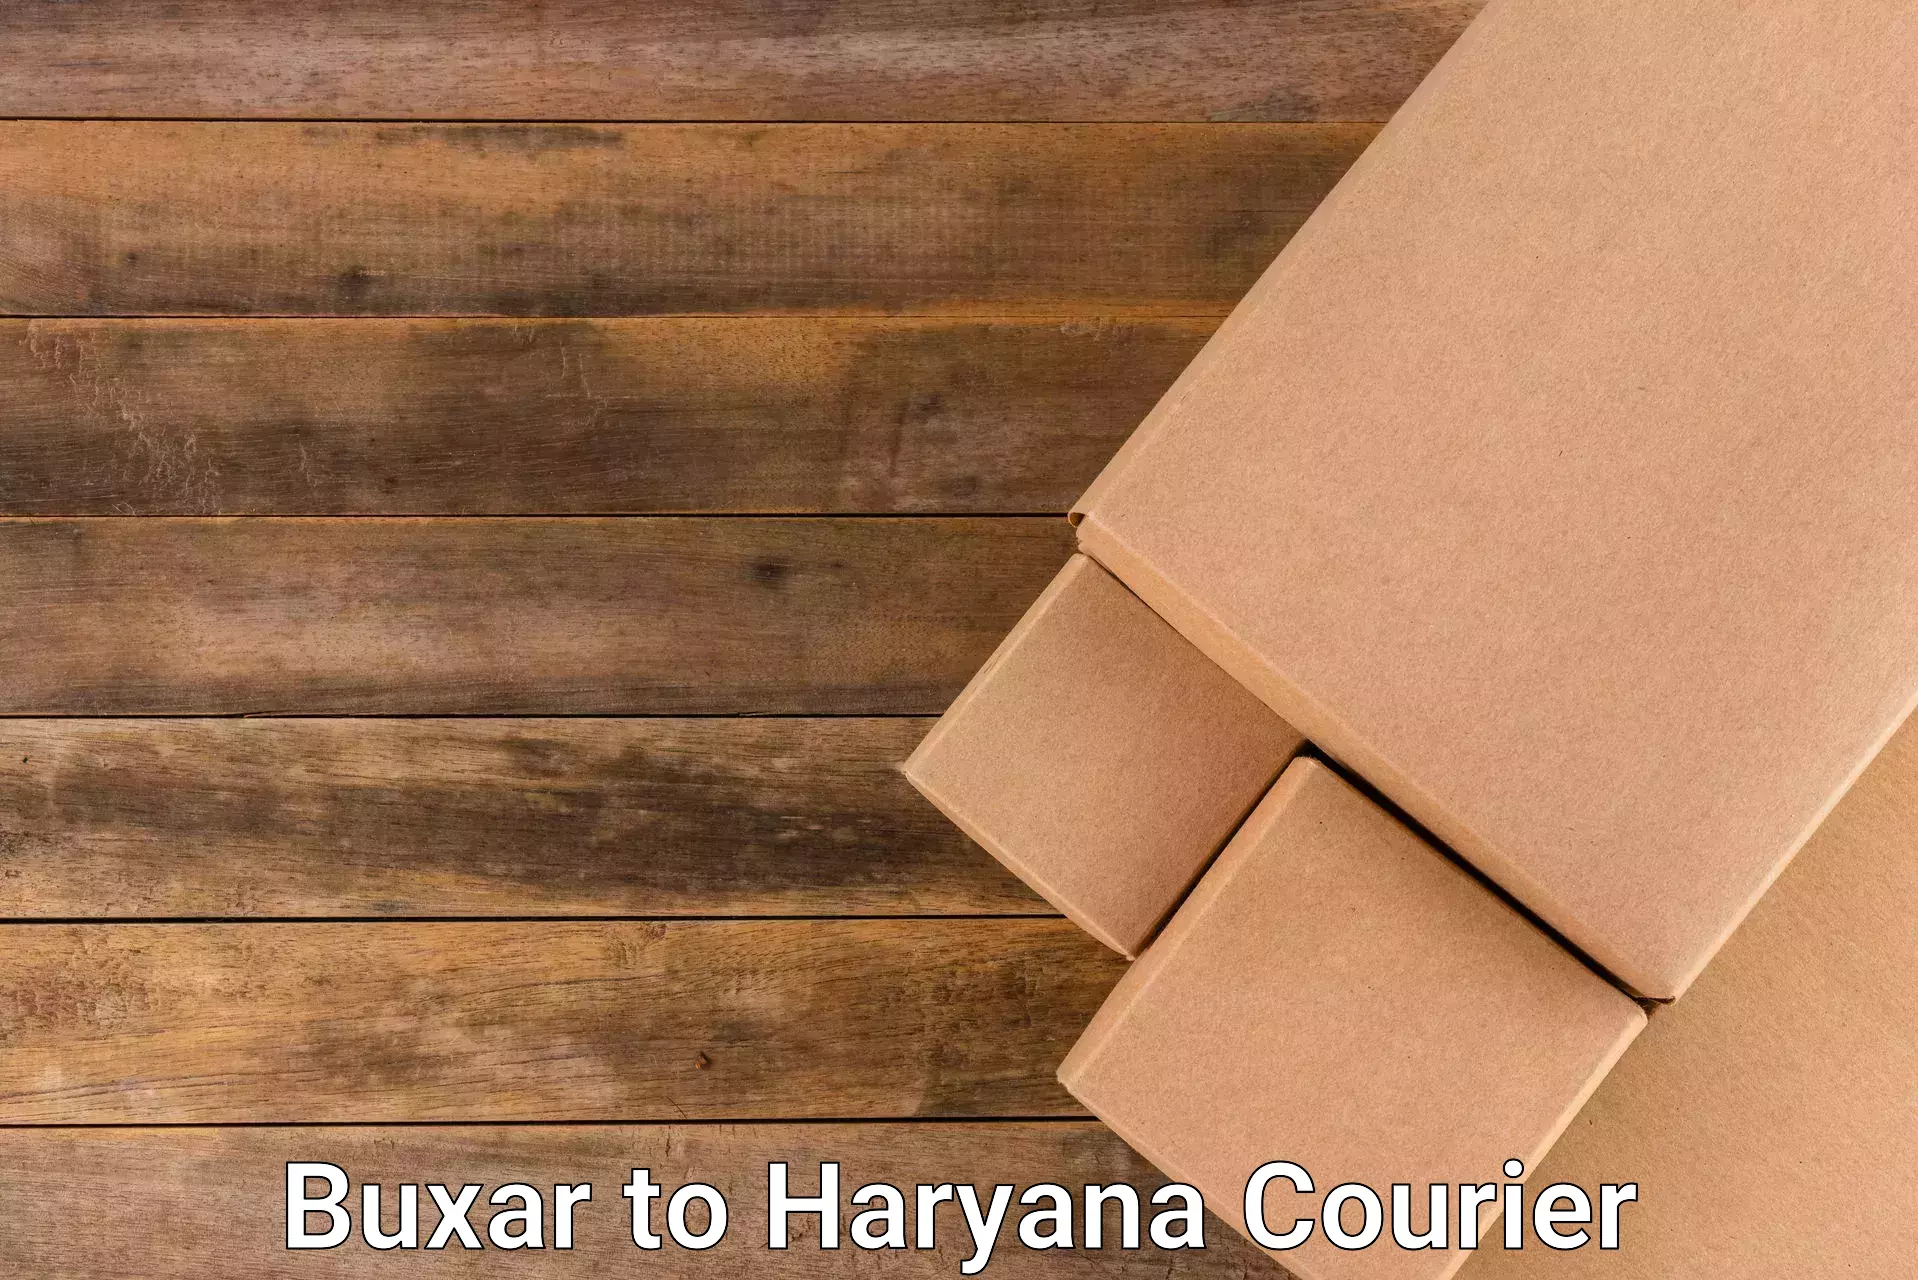 Long distance courier Buxar to Gurgaon